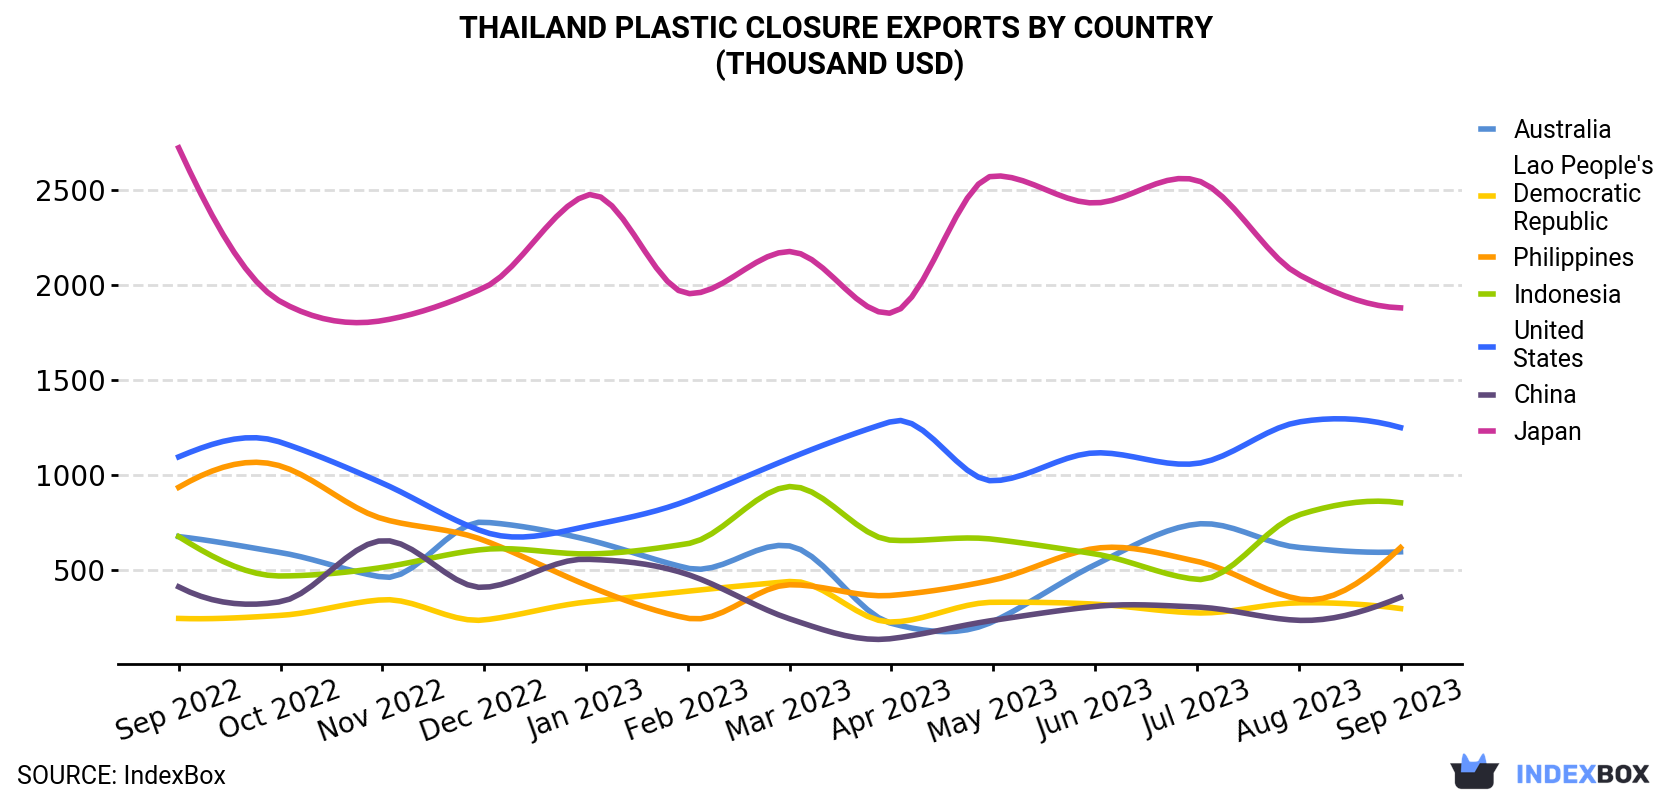 Thailand Plastic Closure Exports By Country (Thousand USD)